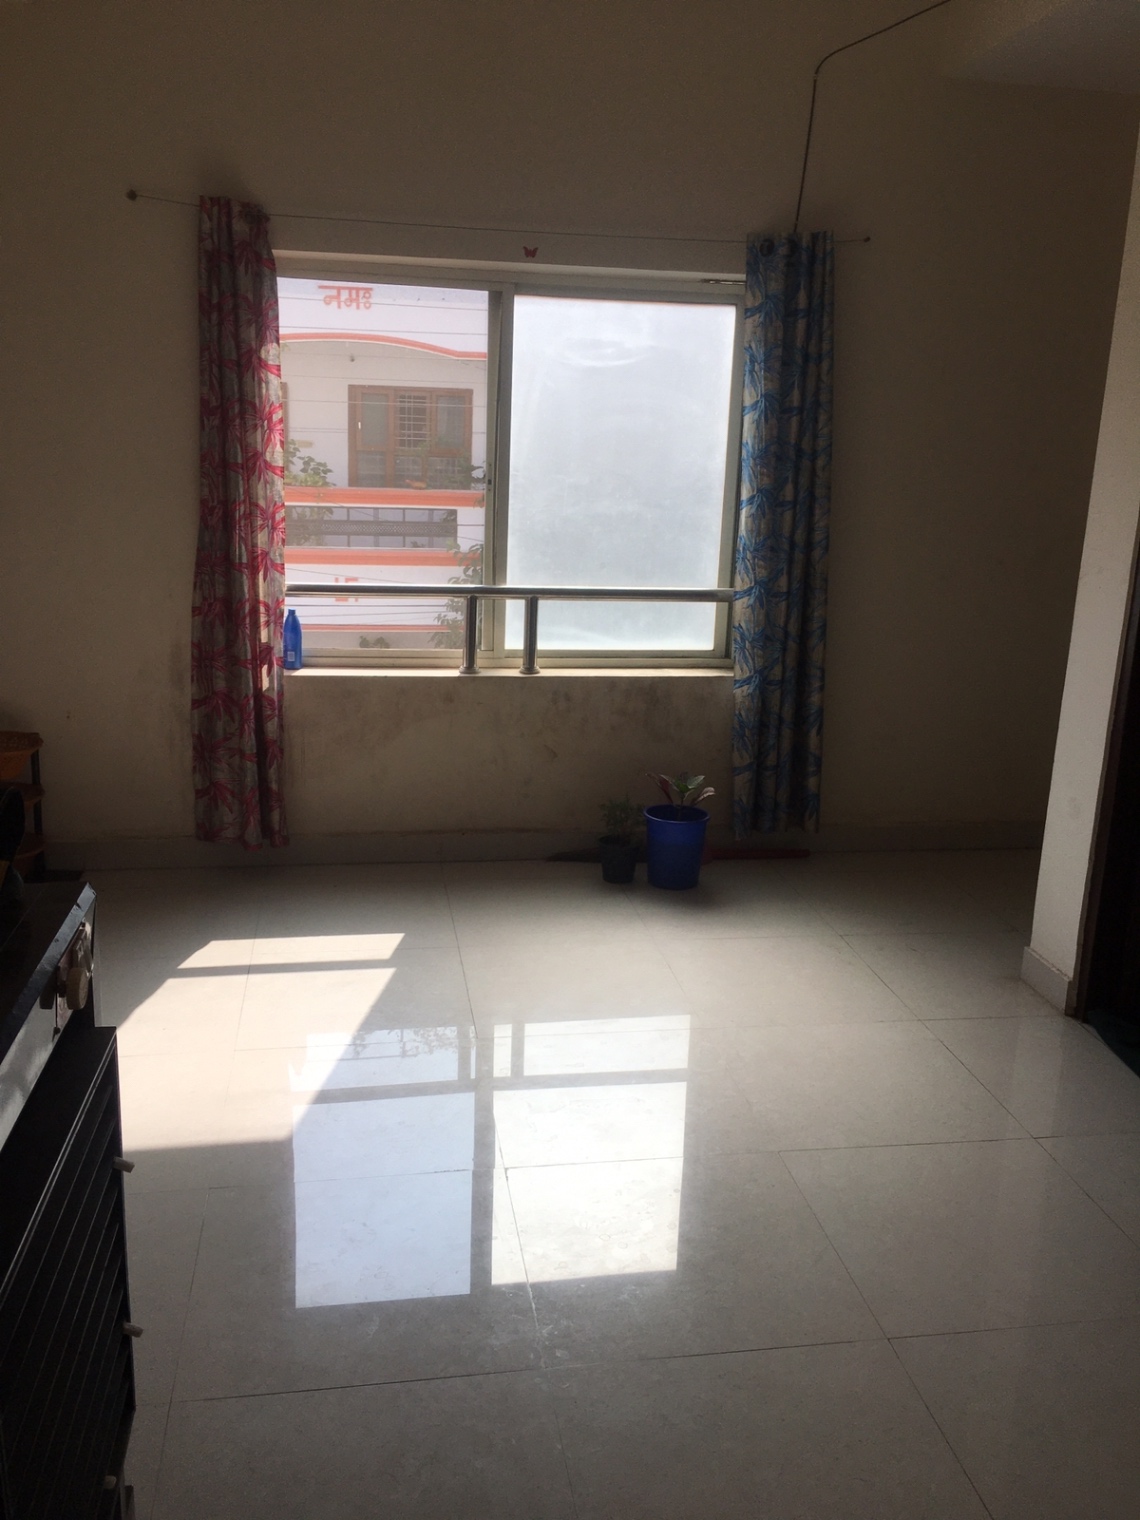 2 Bed/ 2 Bath Rent Apartment/ Flat; 800 sq. ft. carpet area, UnFurnished for rent @Rohit Nagar phase 1